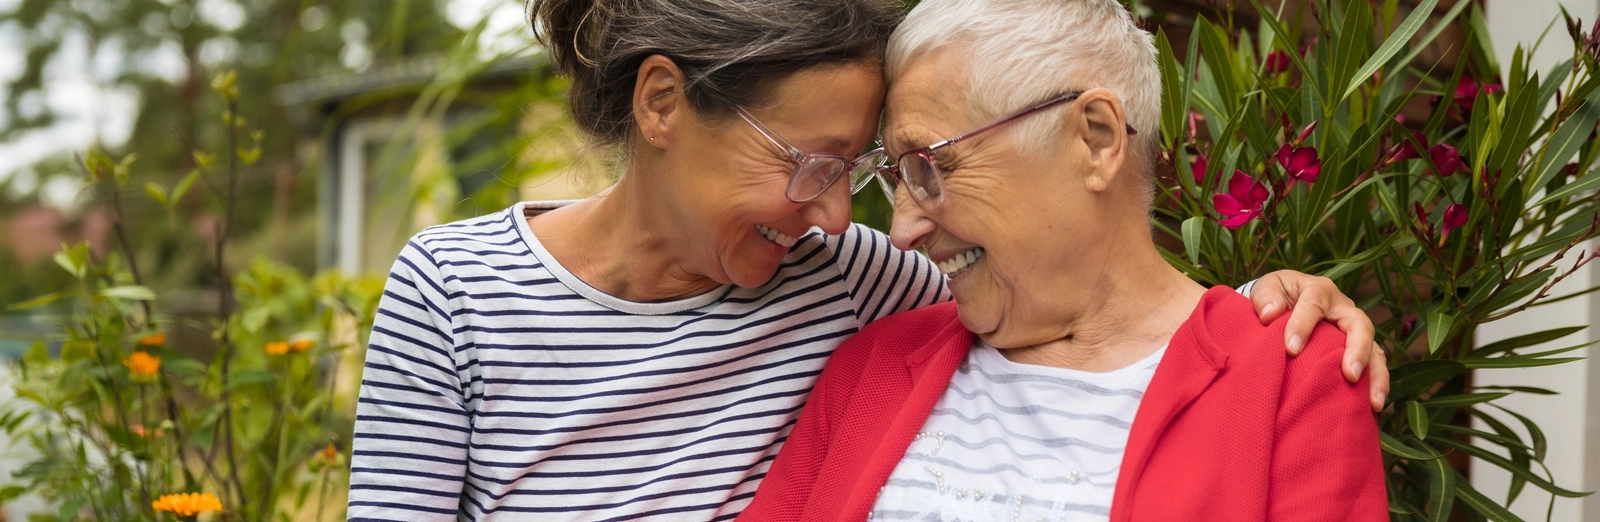 two-older-women-smiling-at-each-other-1600x522.webp